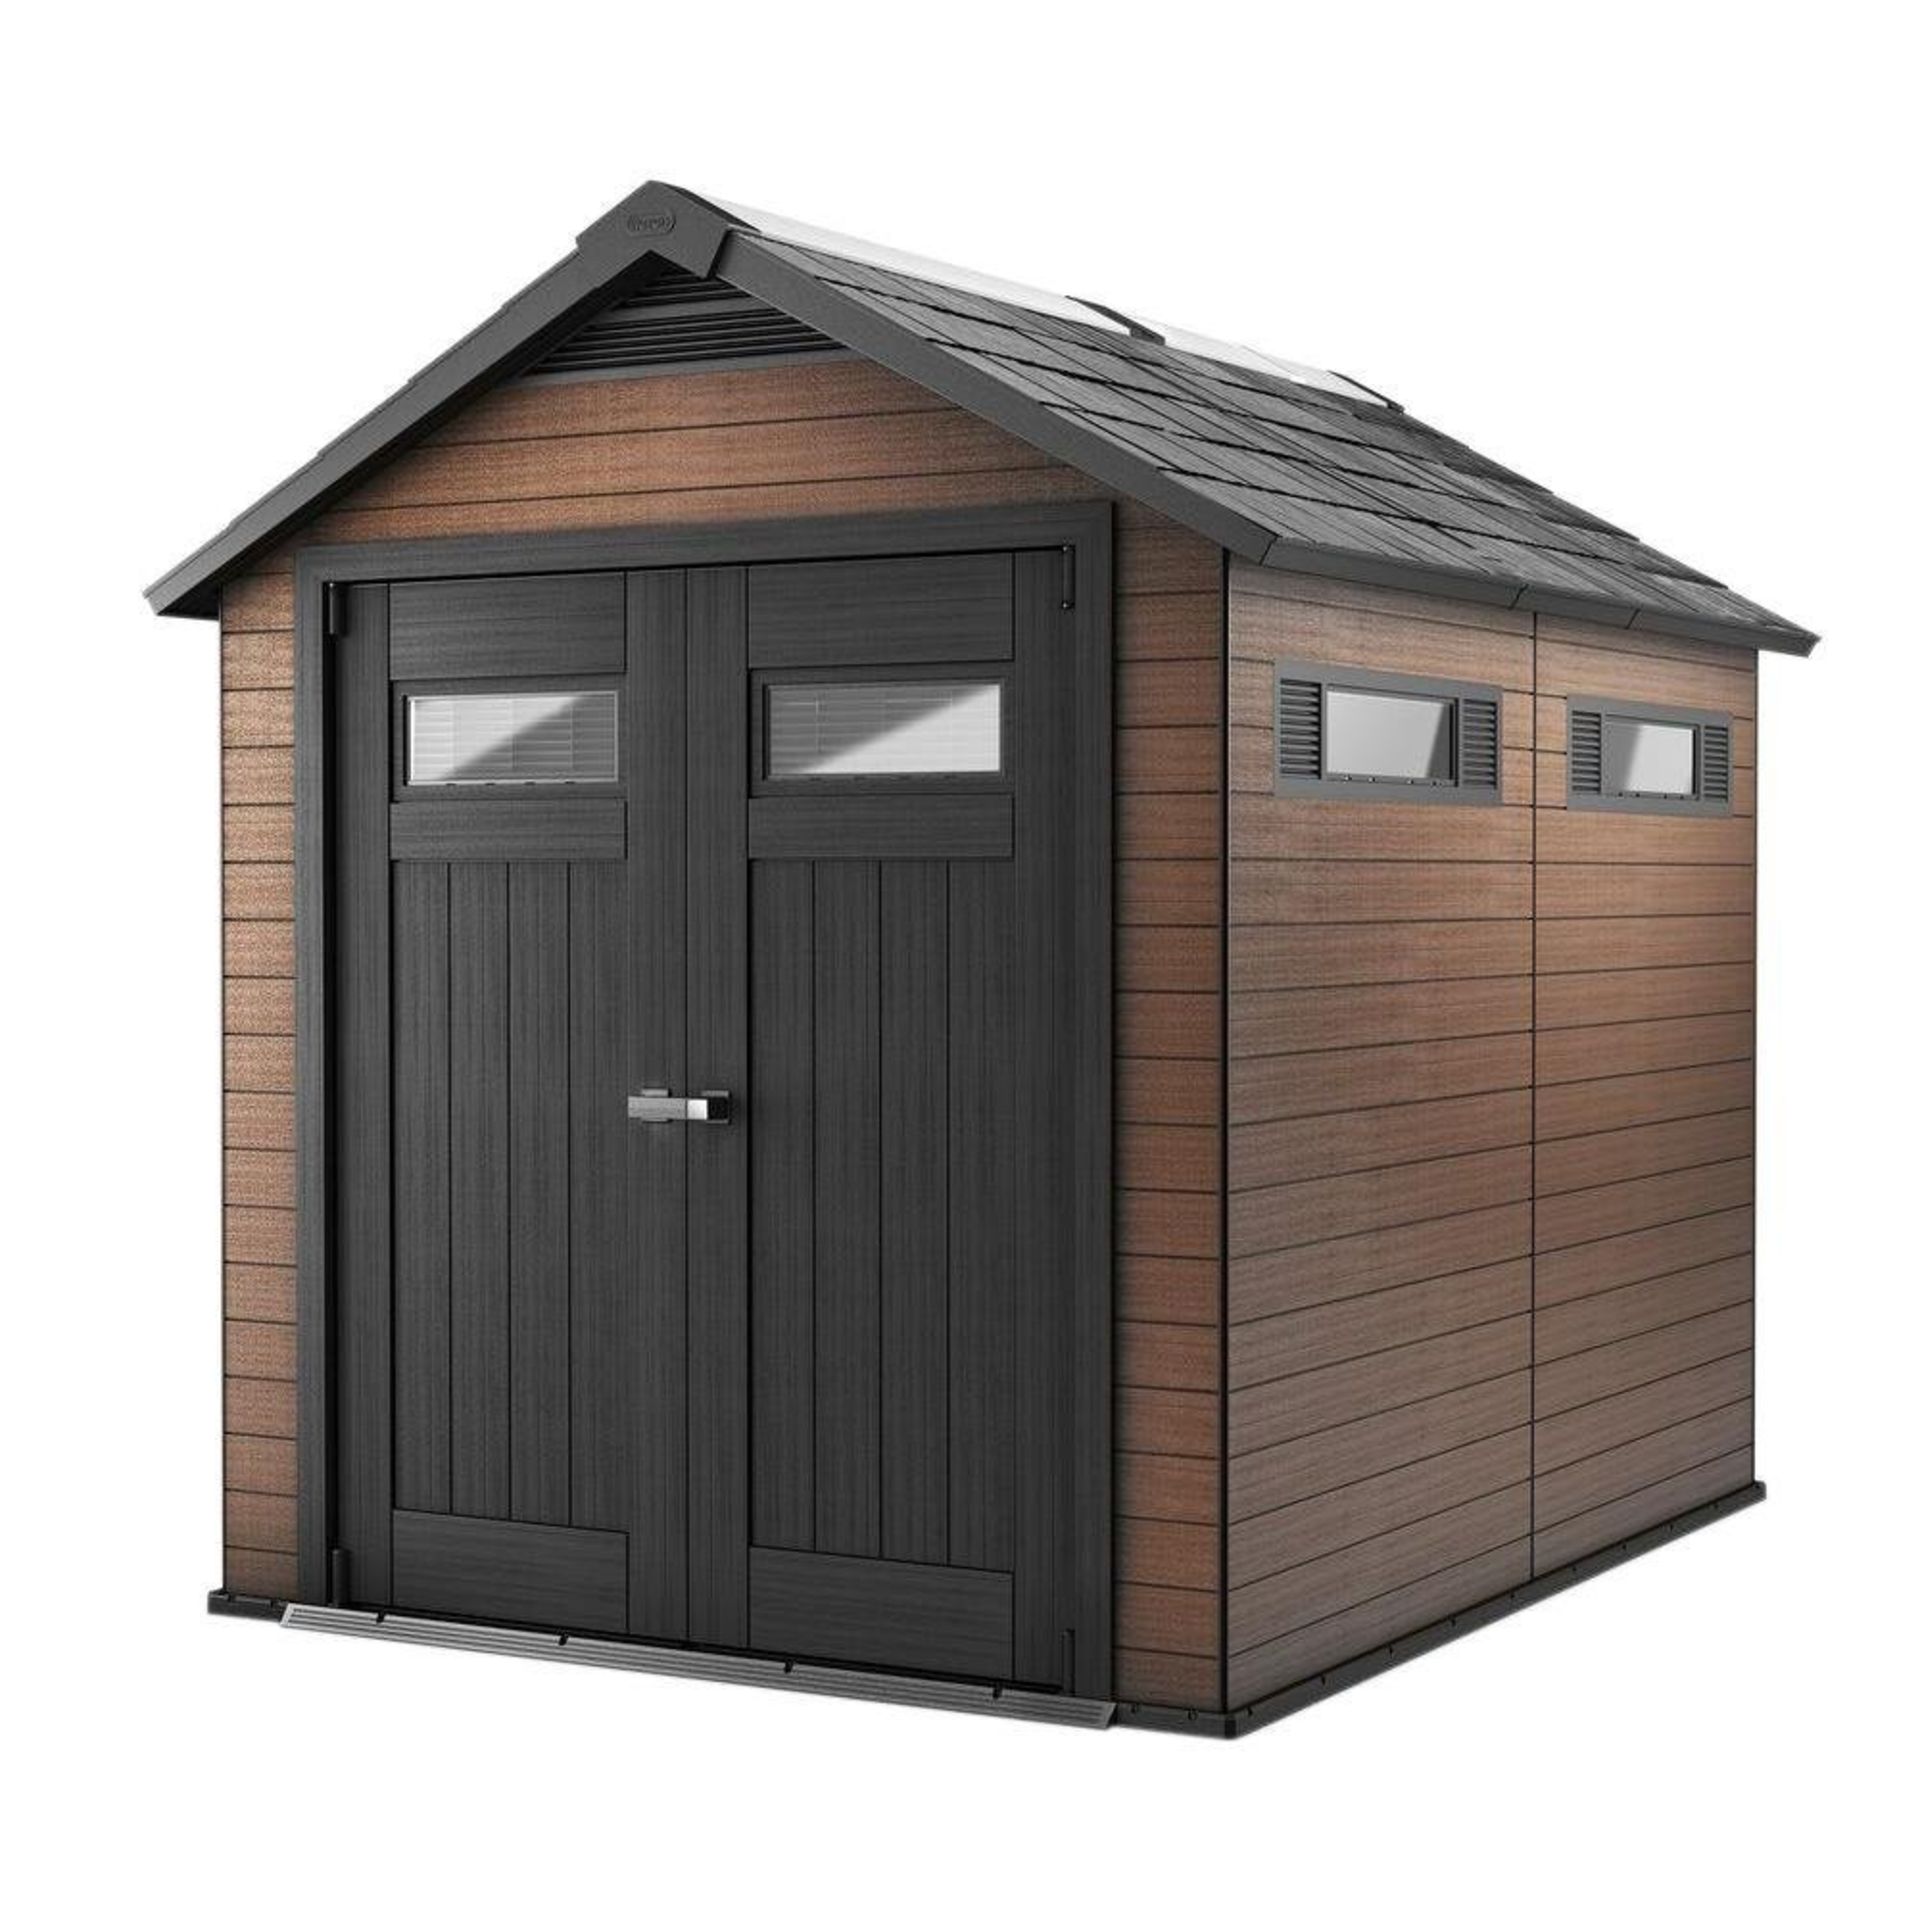 Keter Fusion 759 Garden Shed - Image 2 of 2